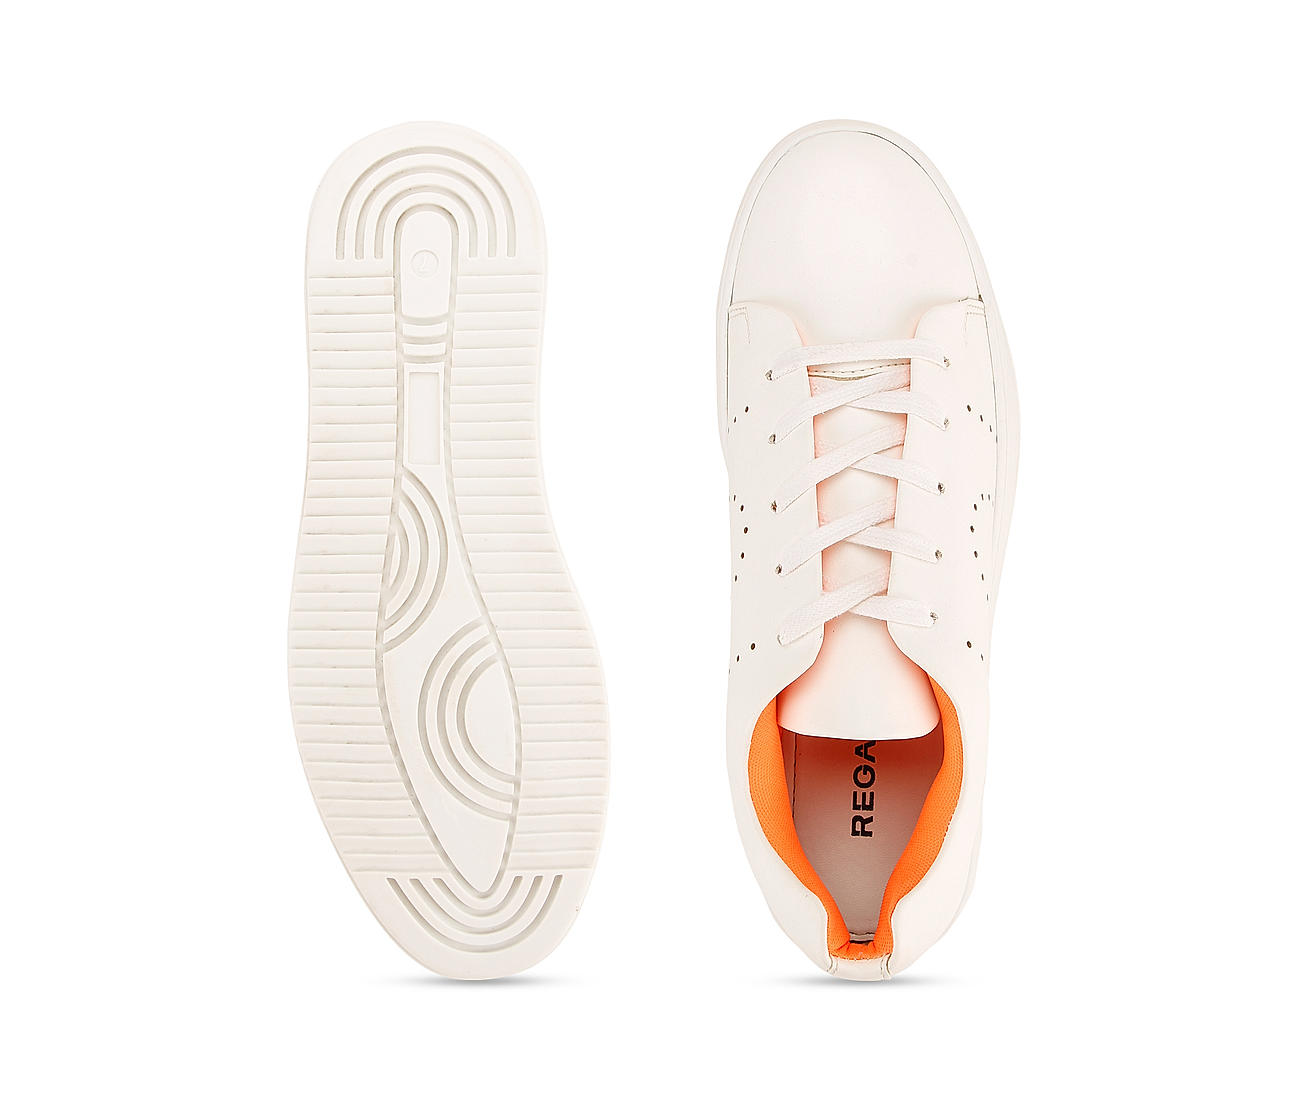 Details more than 133 monica sneakers website latest